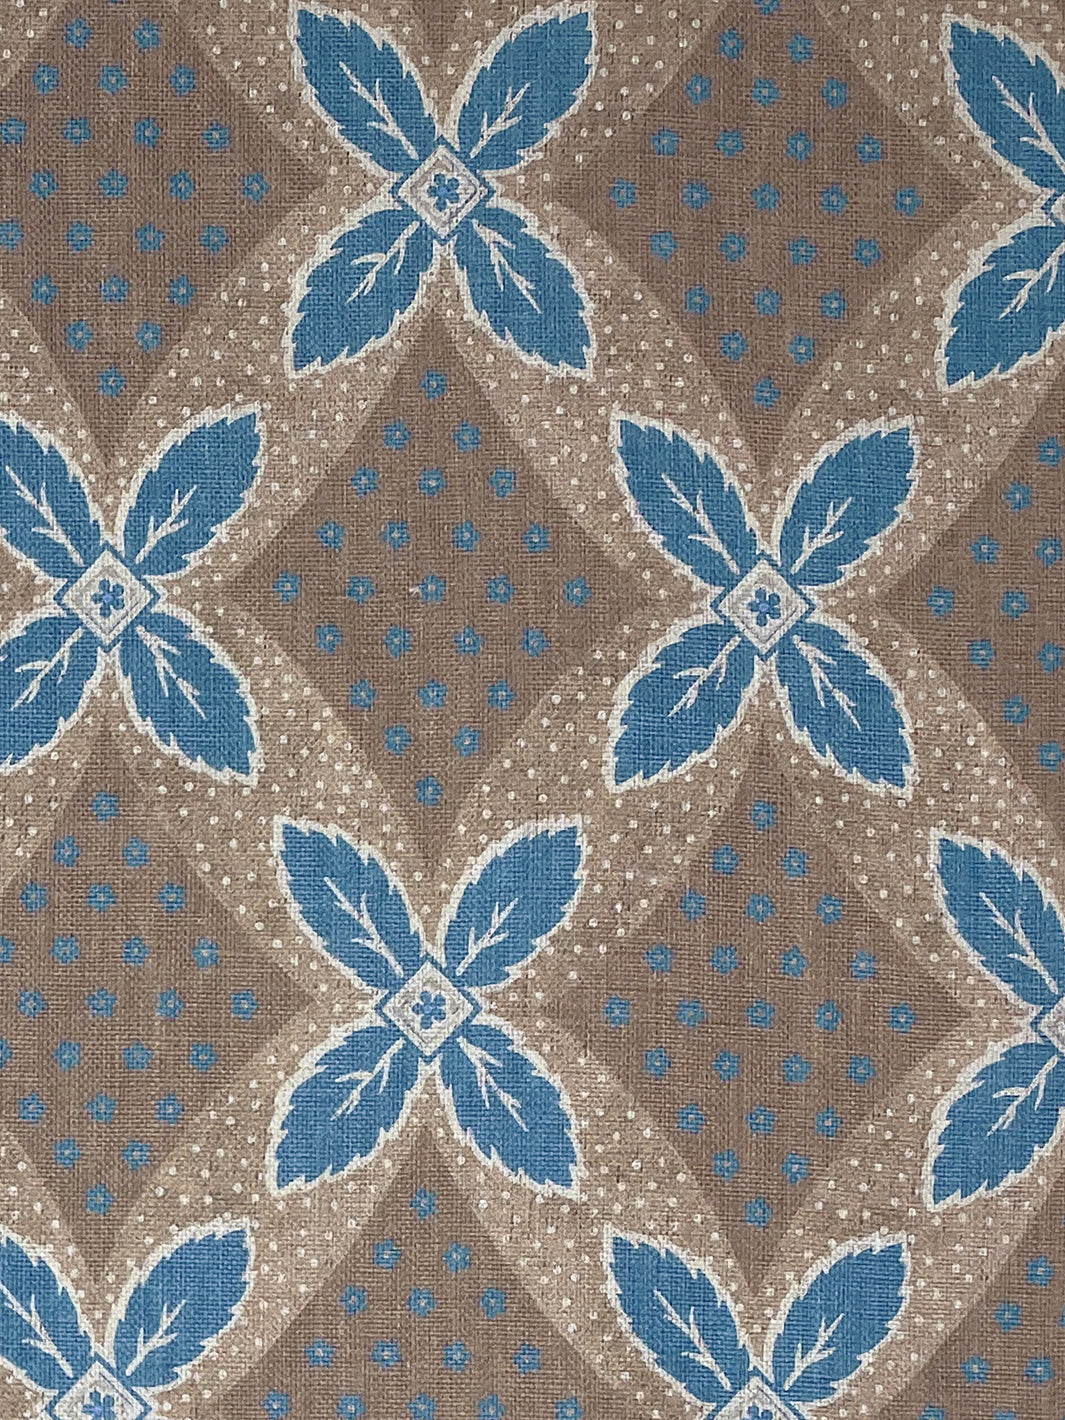 'Arthur' Linen Fabric by Nathan Turner - Blue on Brown